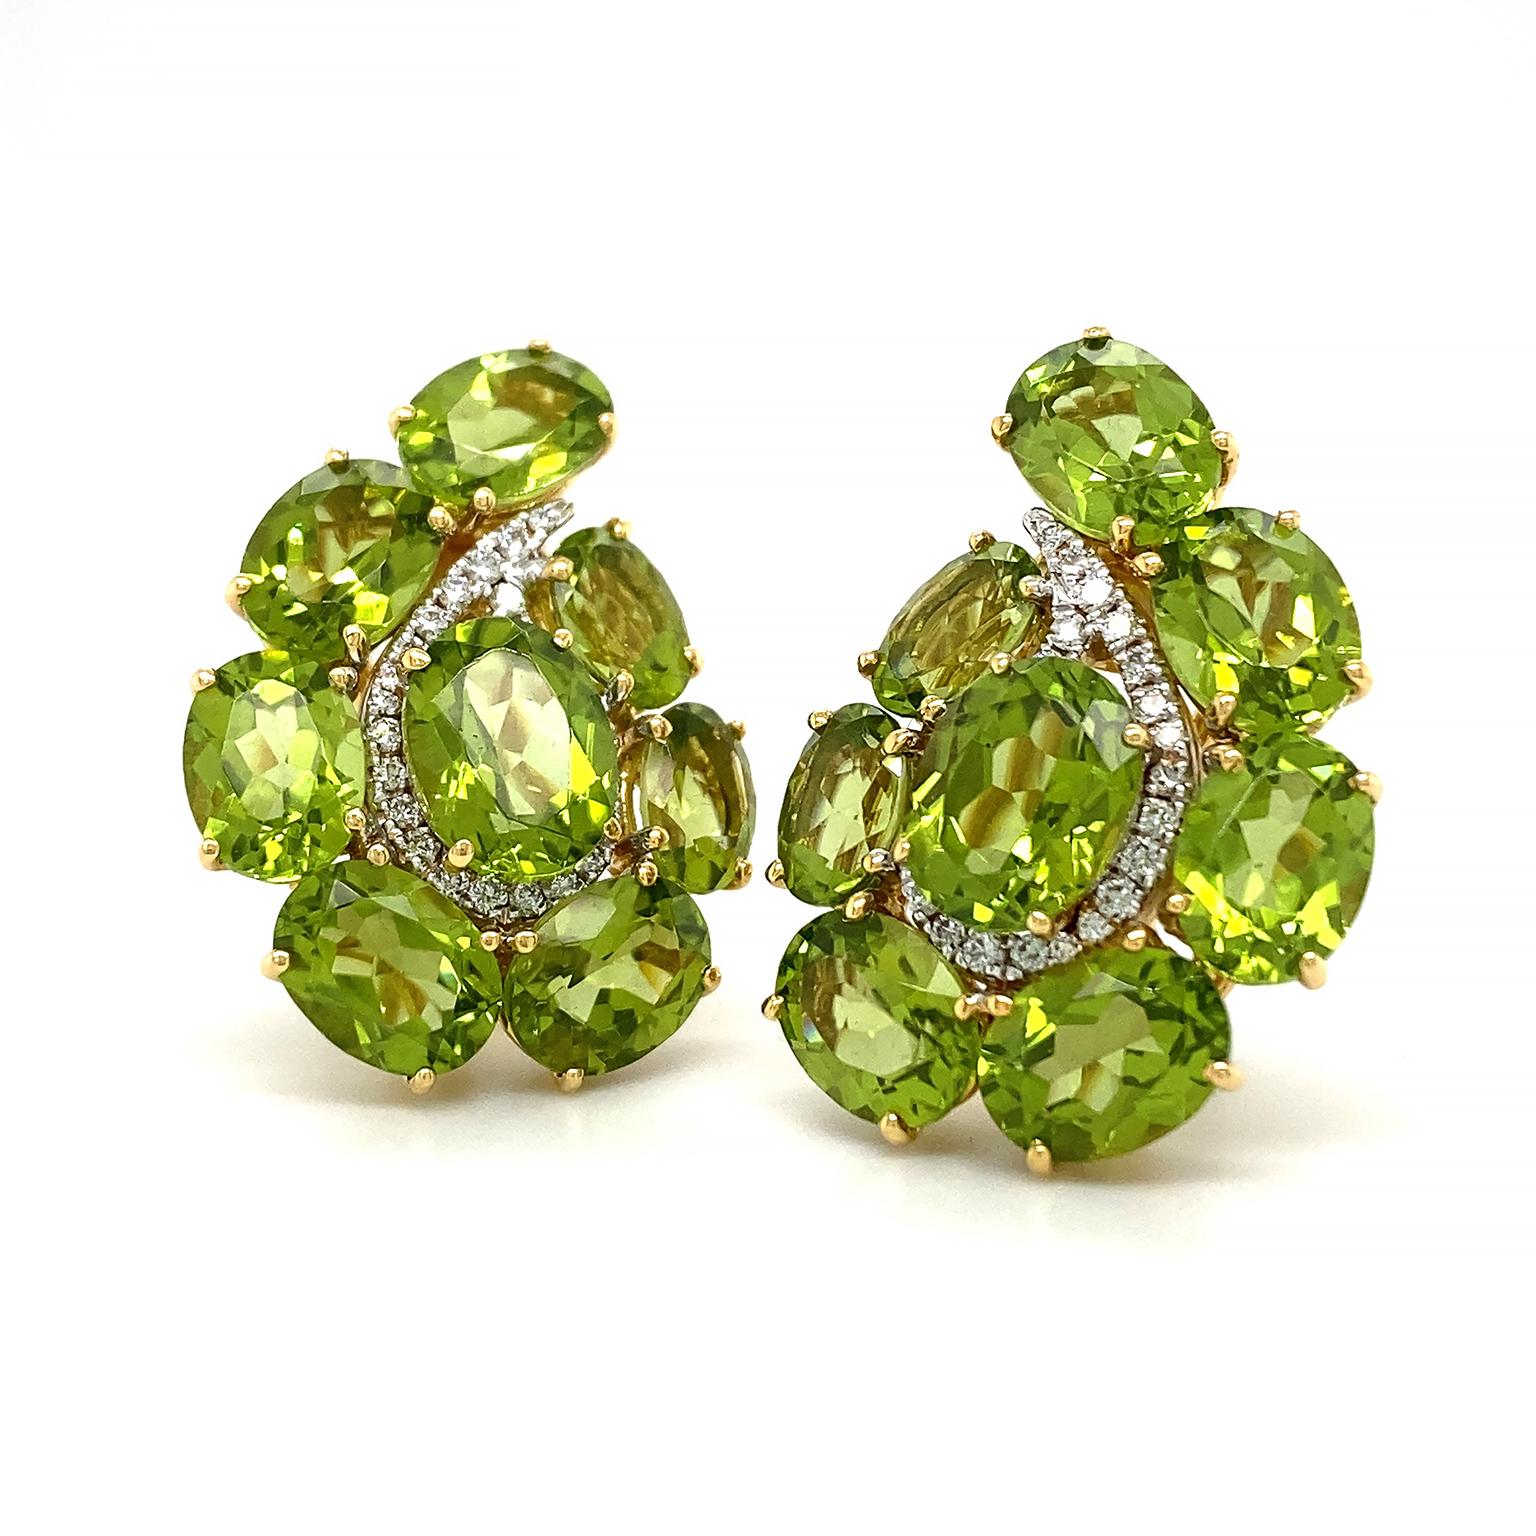 The dazzling bright green of peridots recreates the timeless paisley decoration. Oval-shaped peridots are arranged in the curved teardrop silhouette. A larger peridot sits in the center, as well as a strand of brilliant cut diamonds in a teardrop